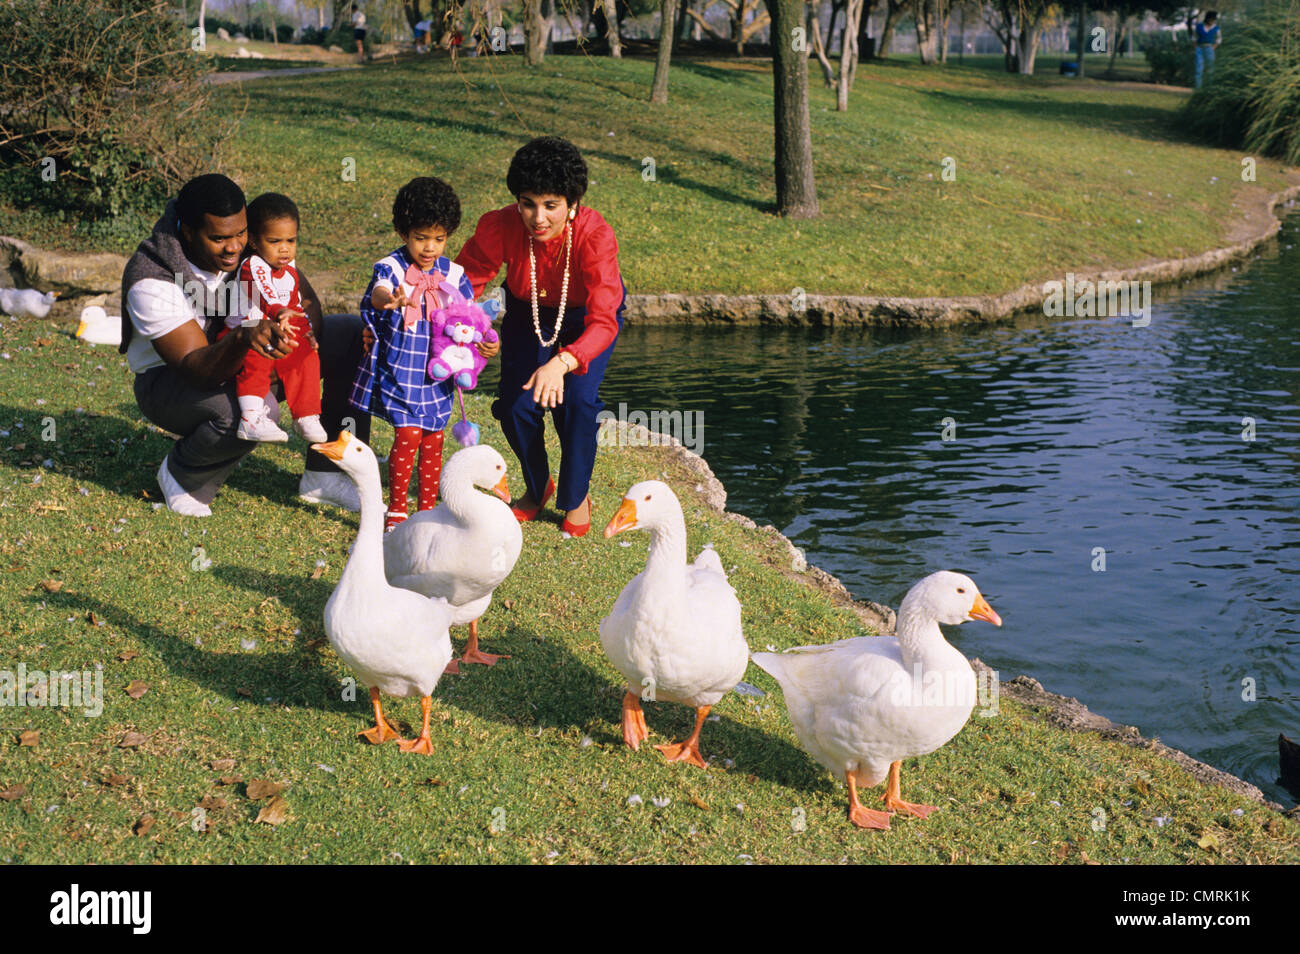 1980 1980s AFRICAN AMERICN FAMILY MOTHER FATHER SON DAUGHTER FEEDING GEESE BY LAKE Stock Photo